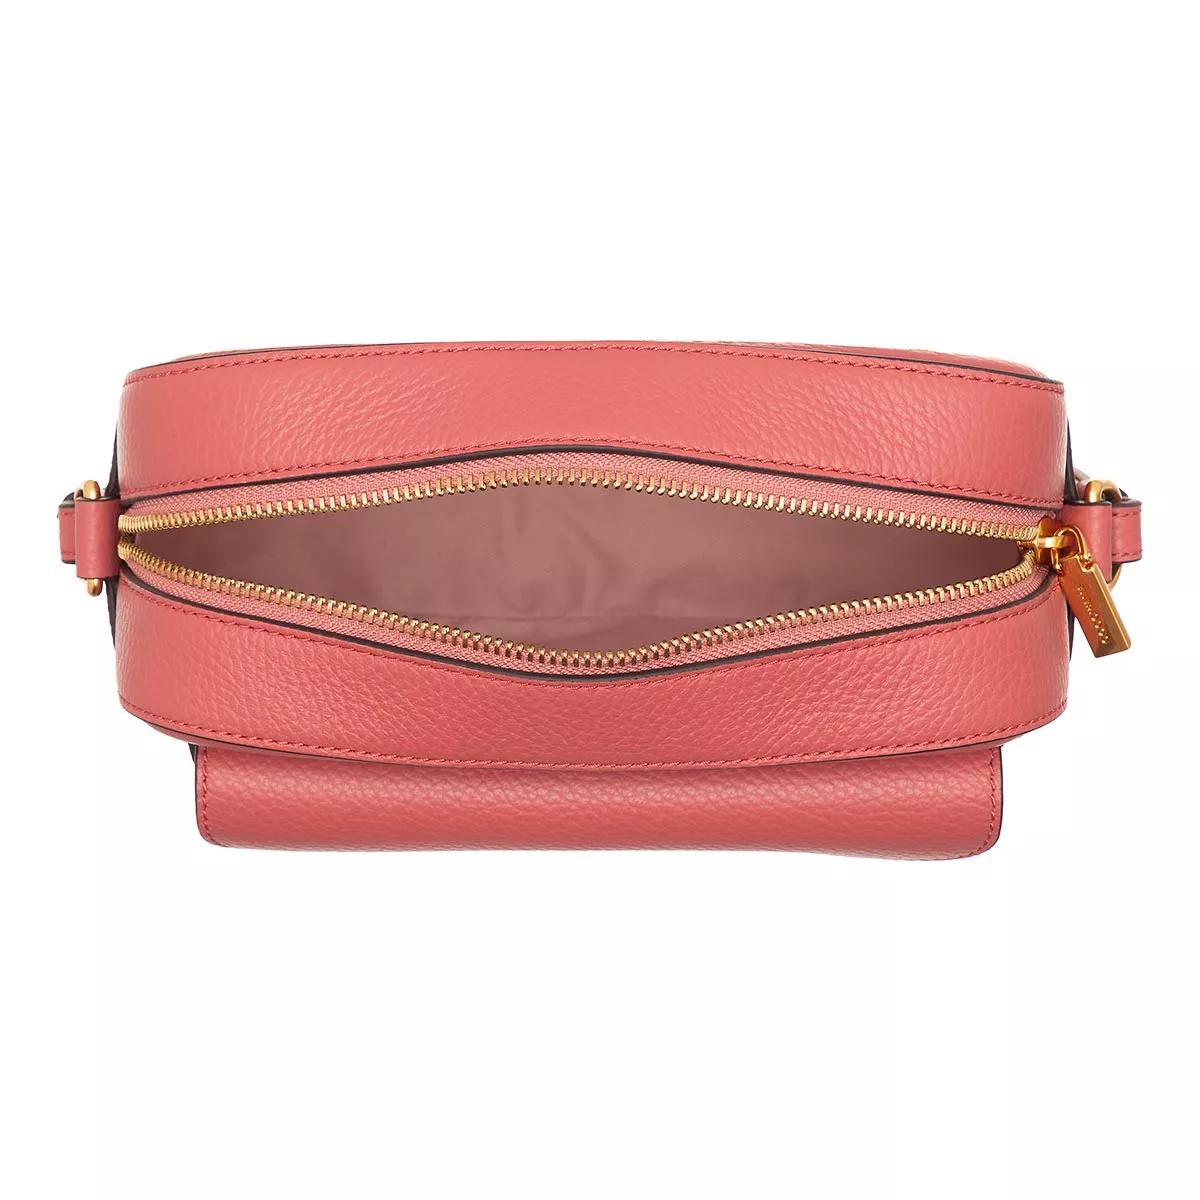 Coccinelle Shoppers Beat Soft Small Shoulder Bag in koraal